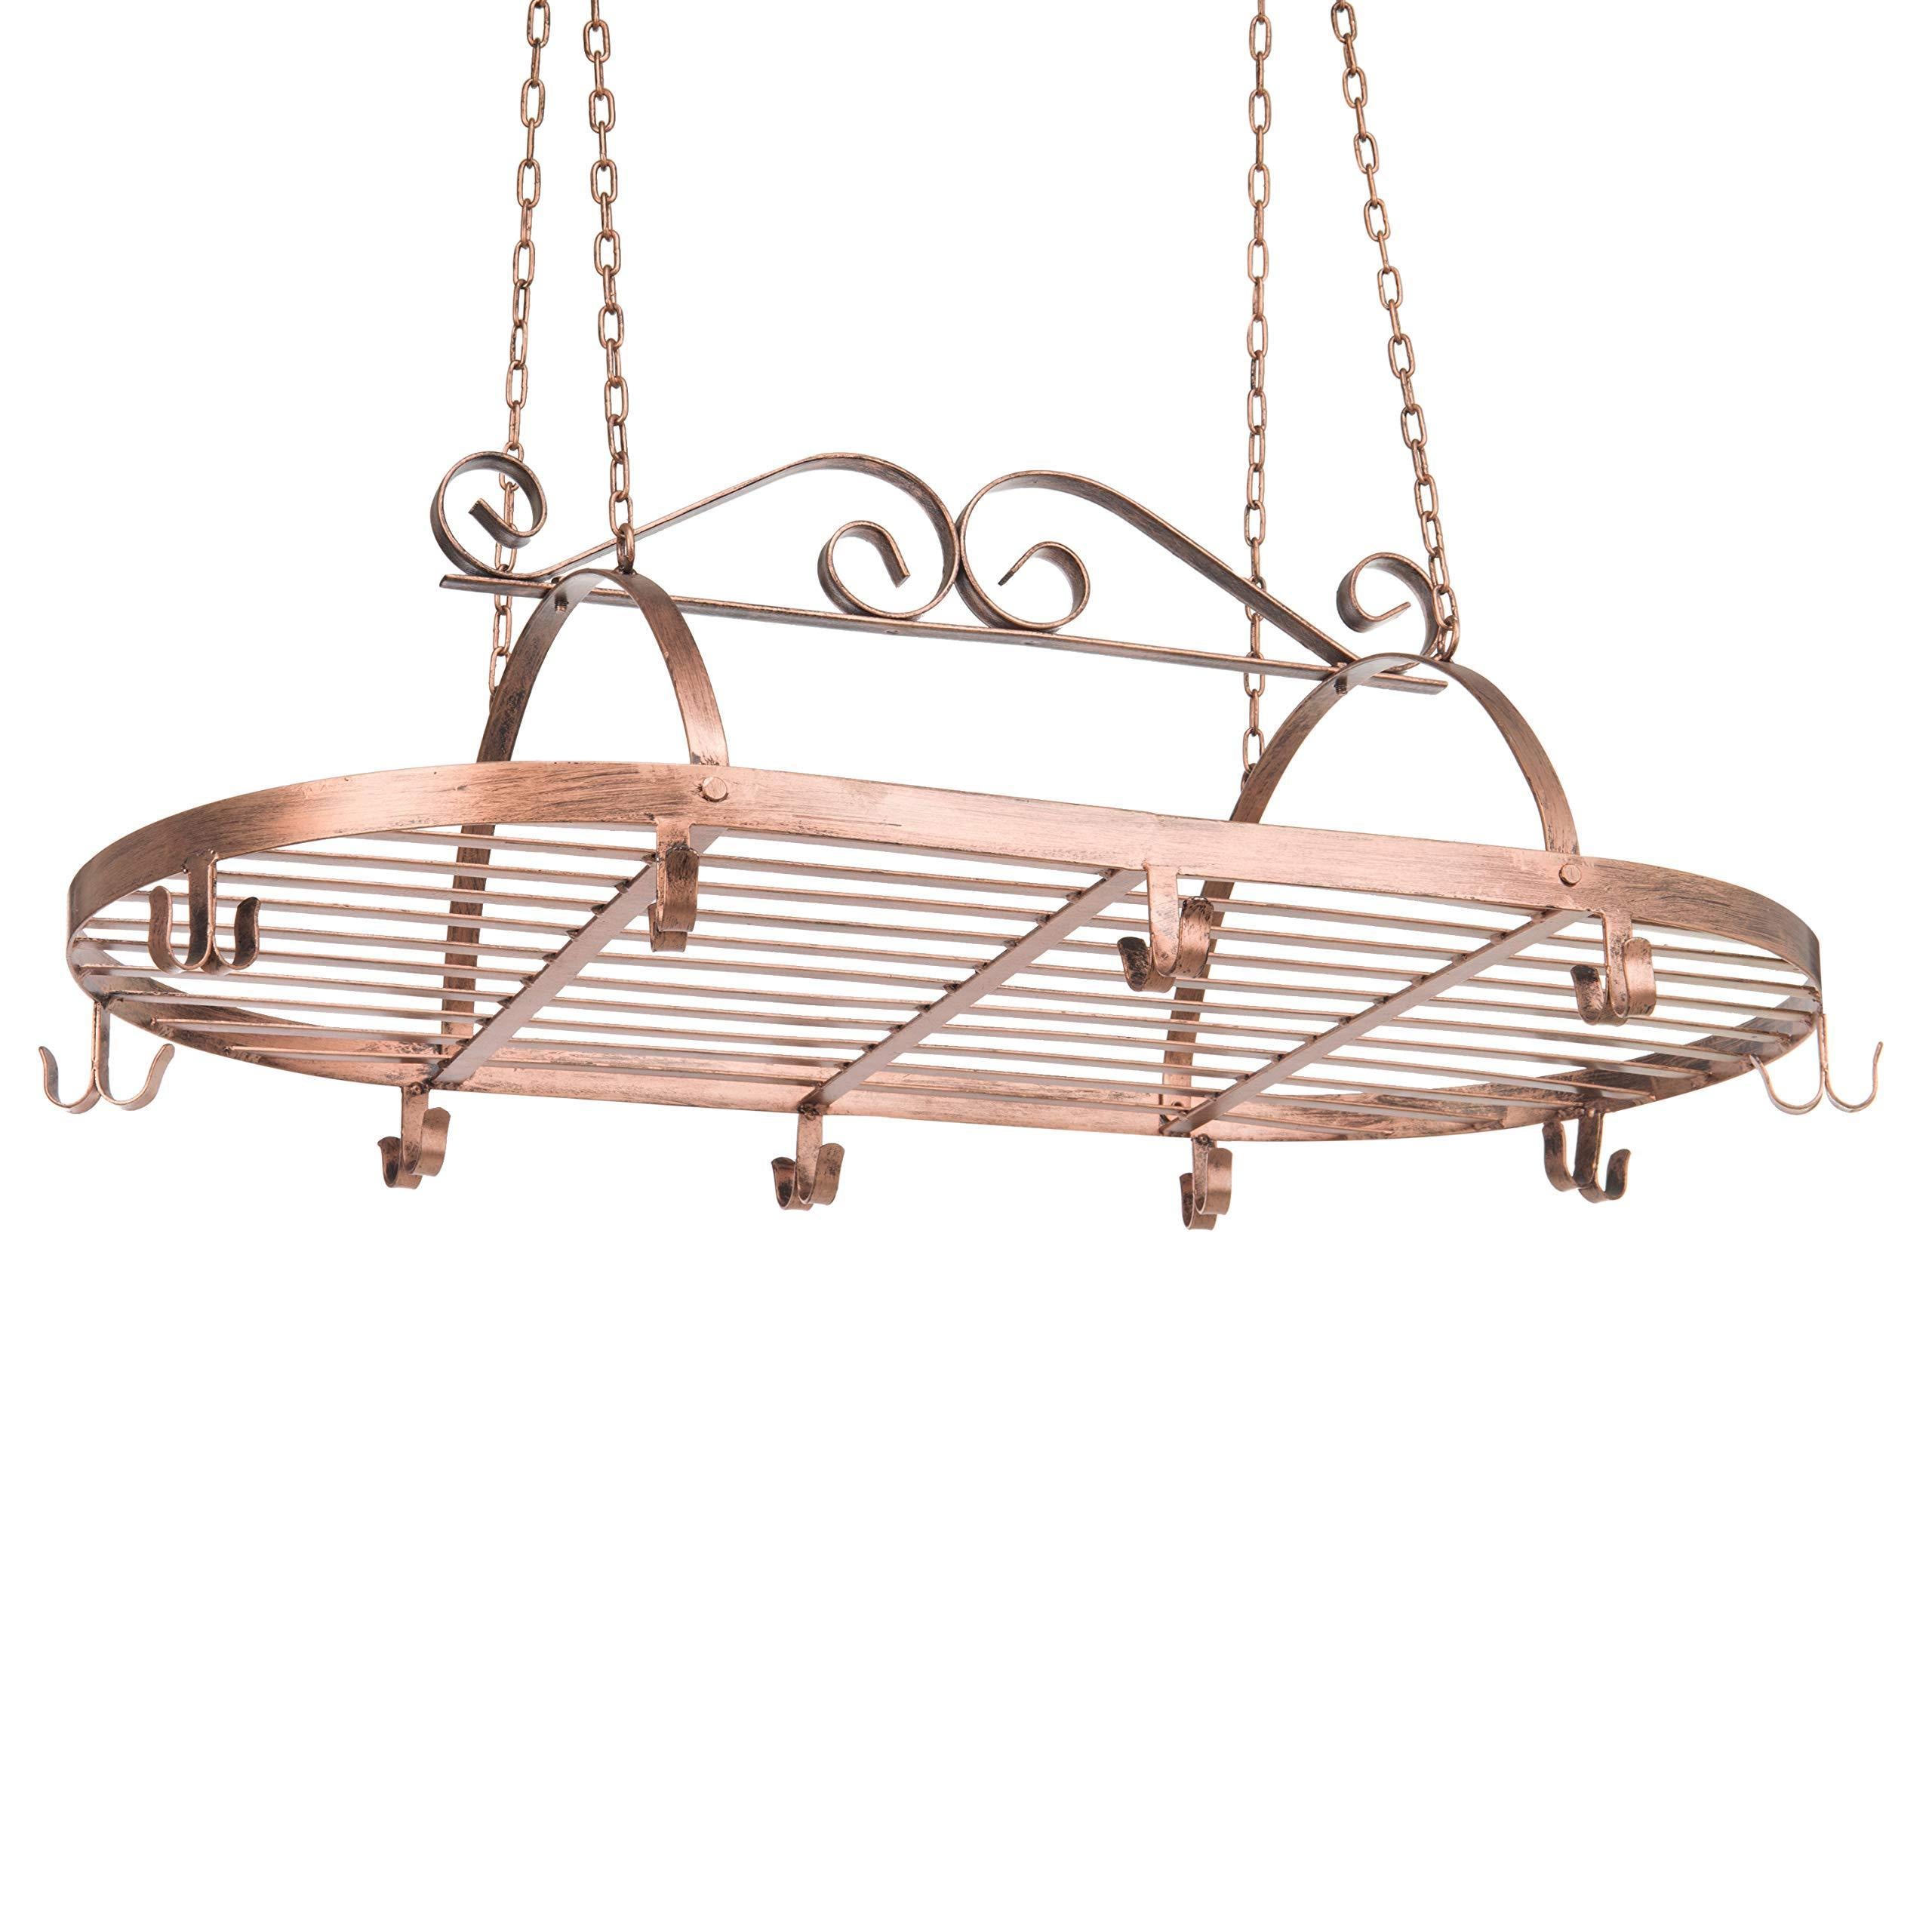 Featured bronze tone scrollwork metal ceiling mounted hanging rack for kitchen utensils pots pans holder